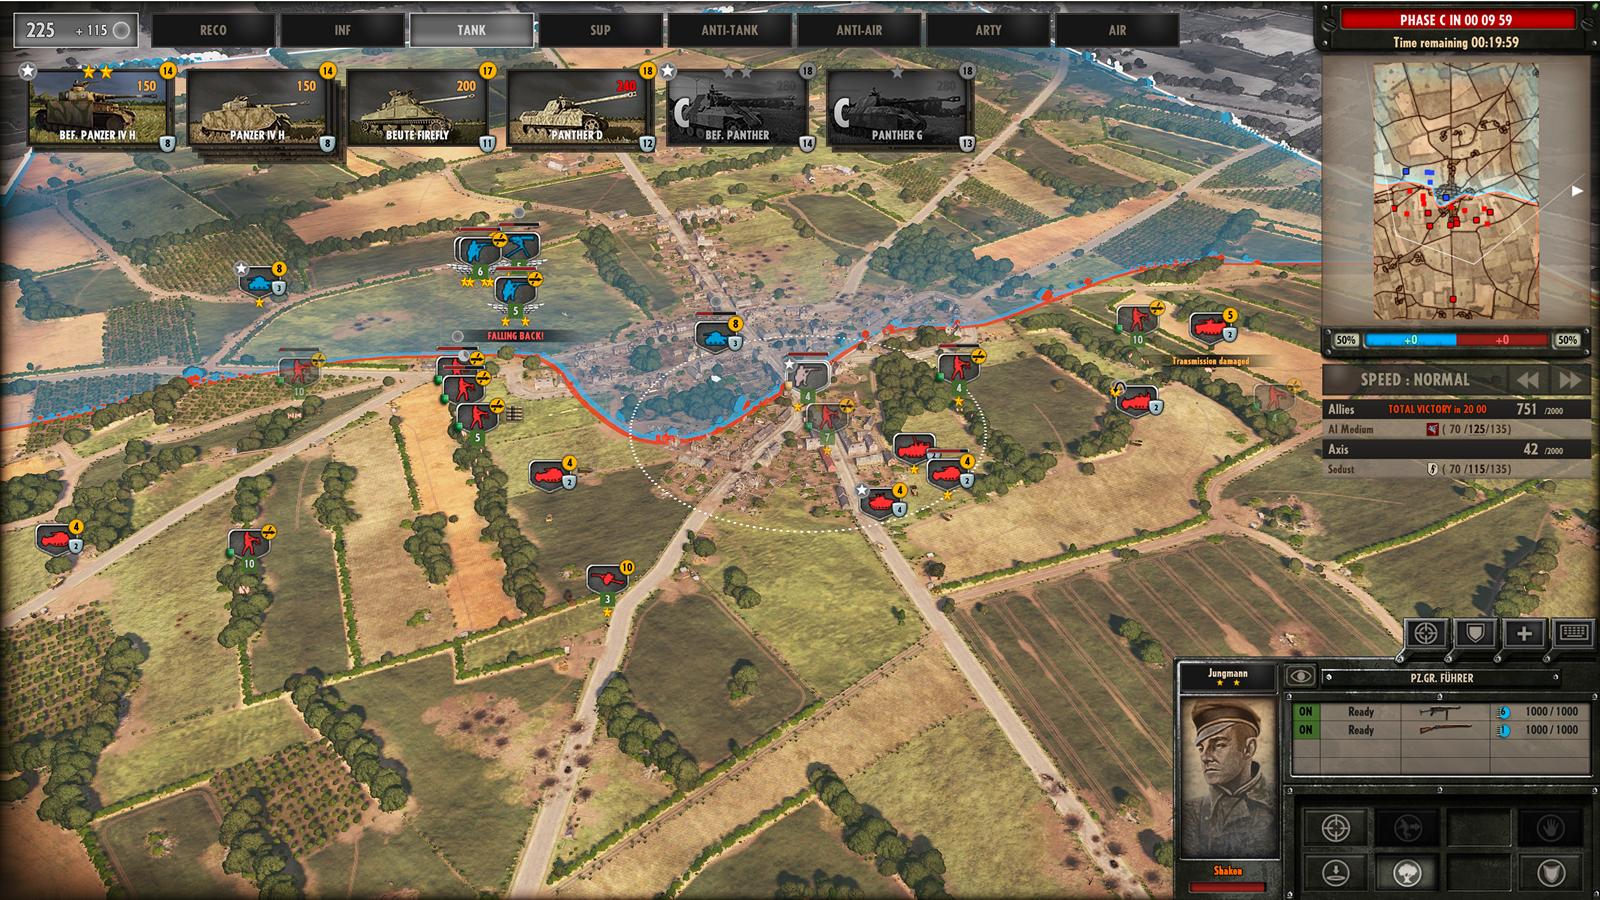 free download steel division 1944